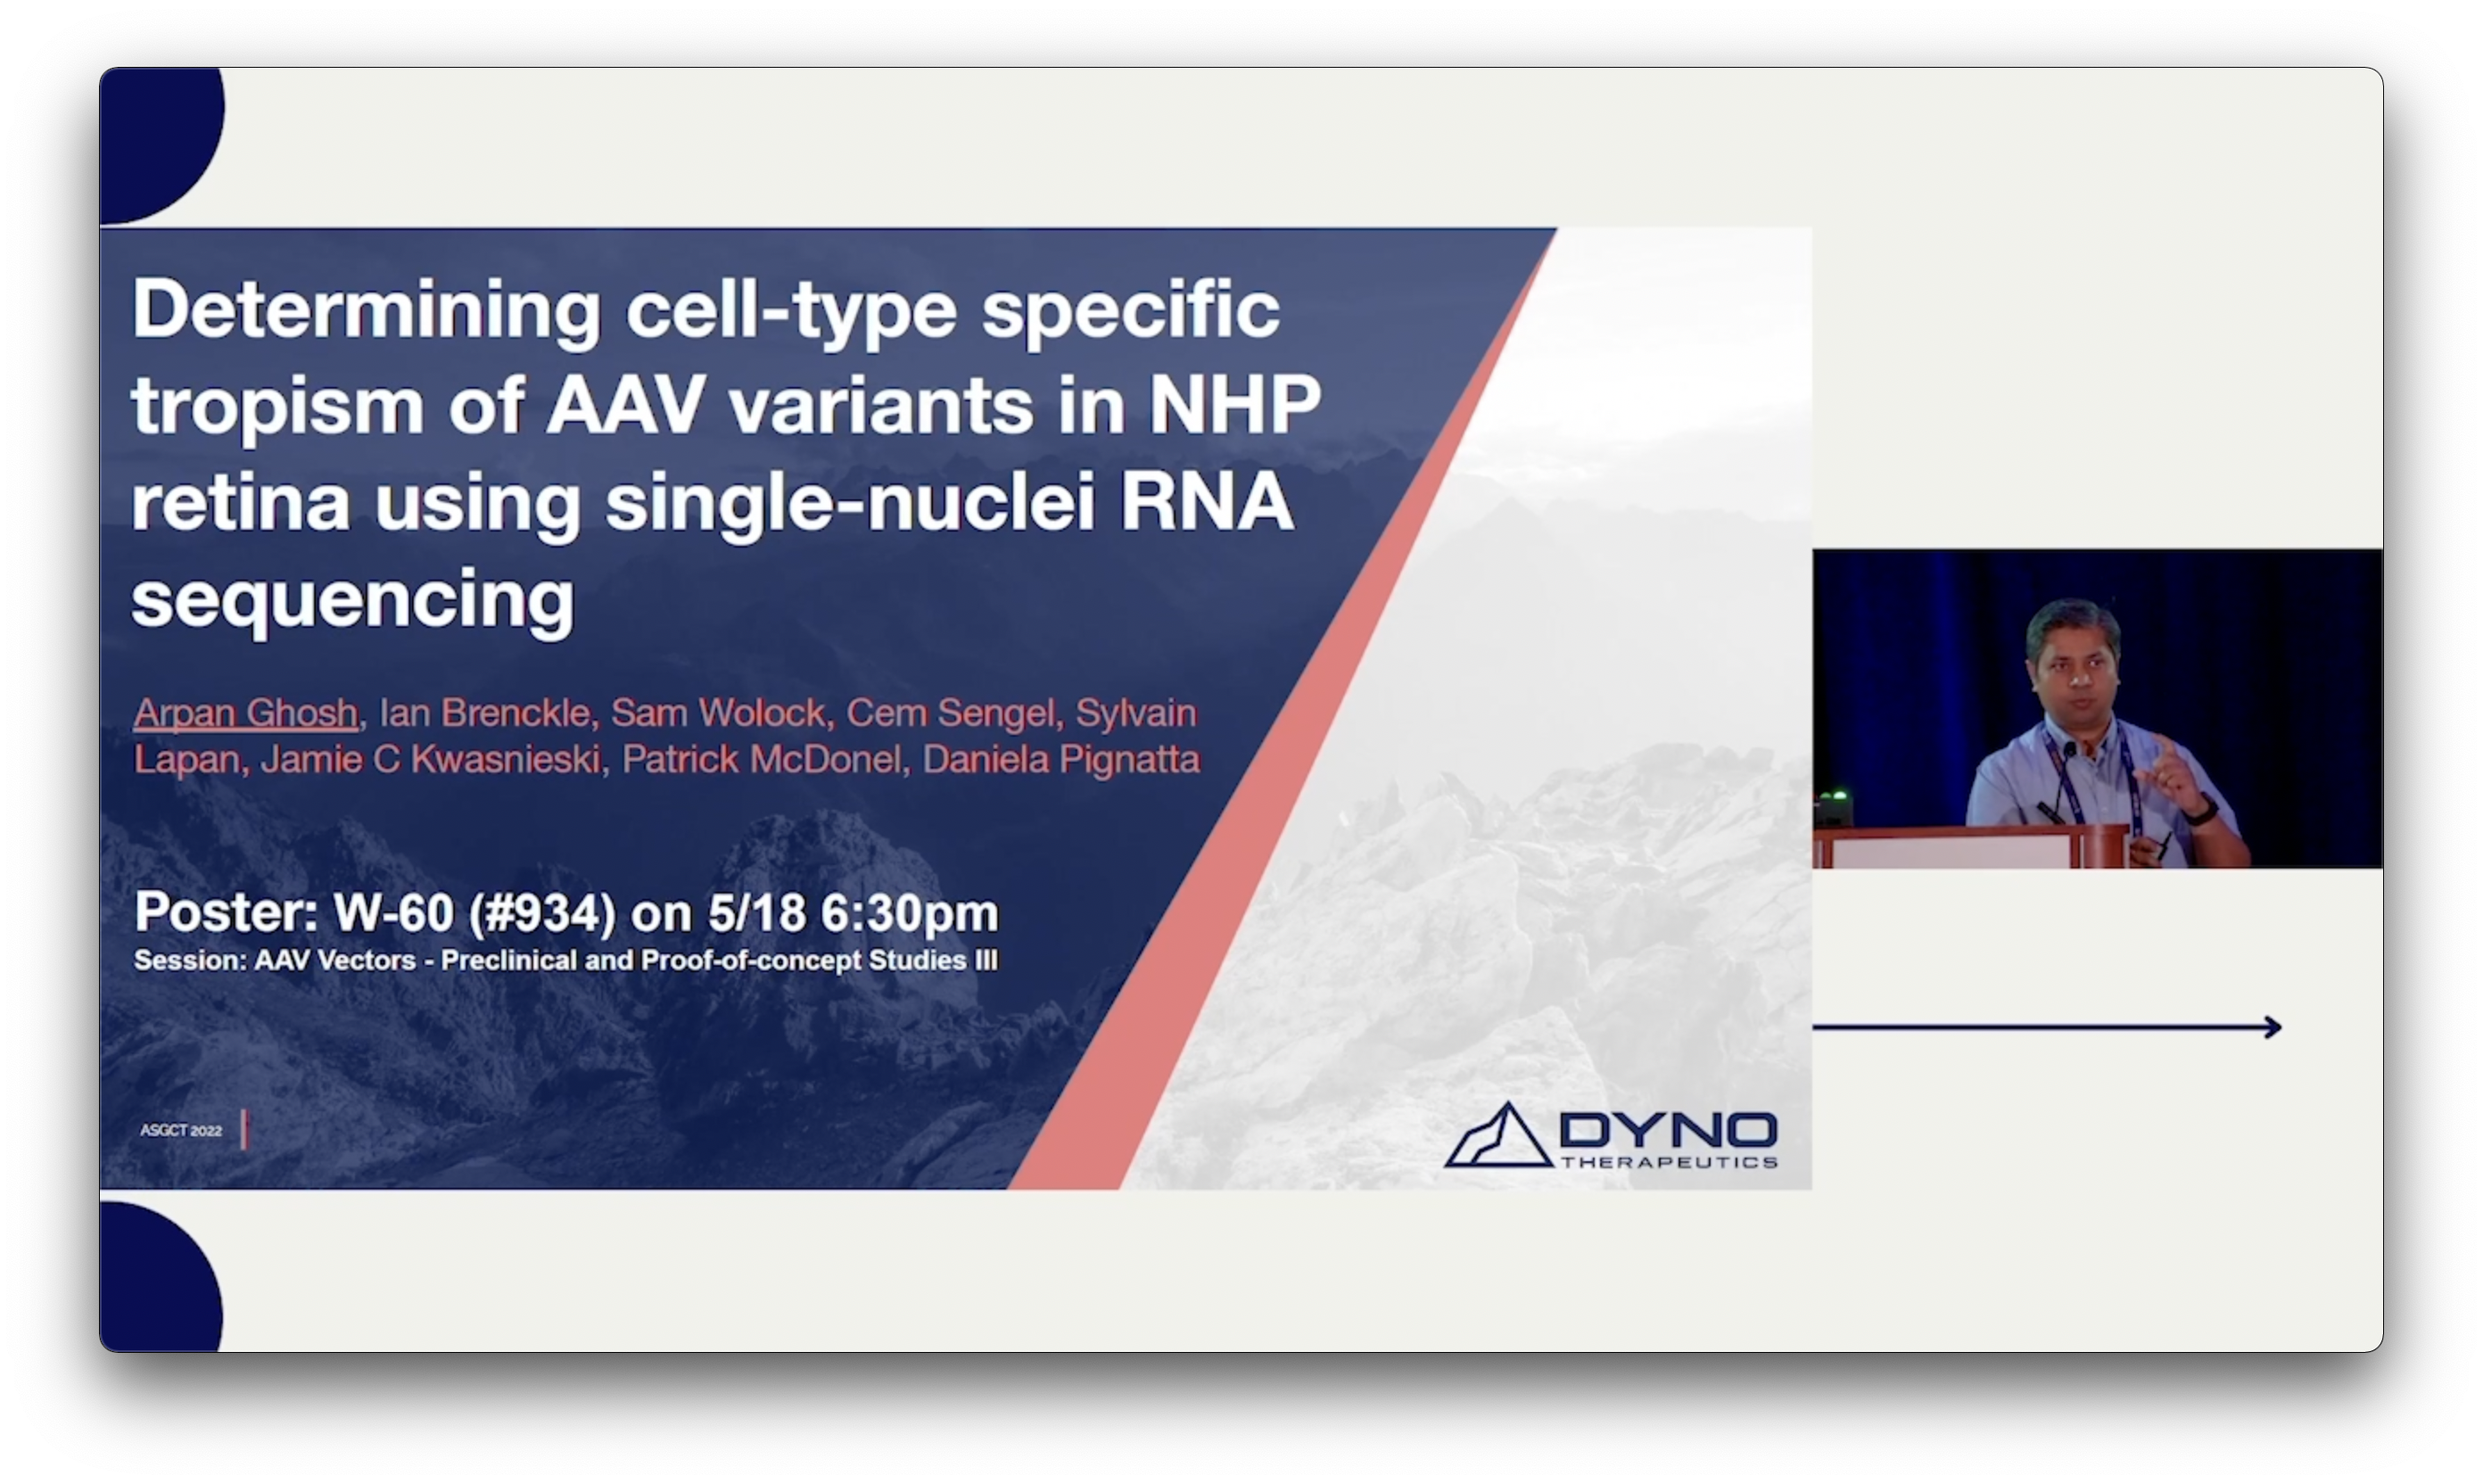 Single-nuclei RNA Sequencing